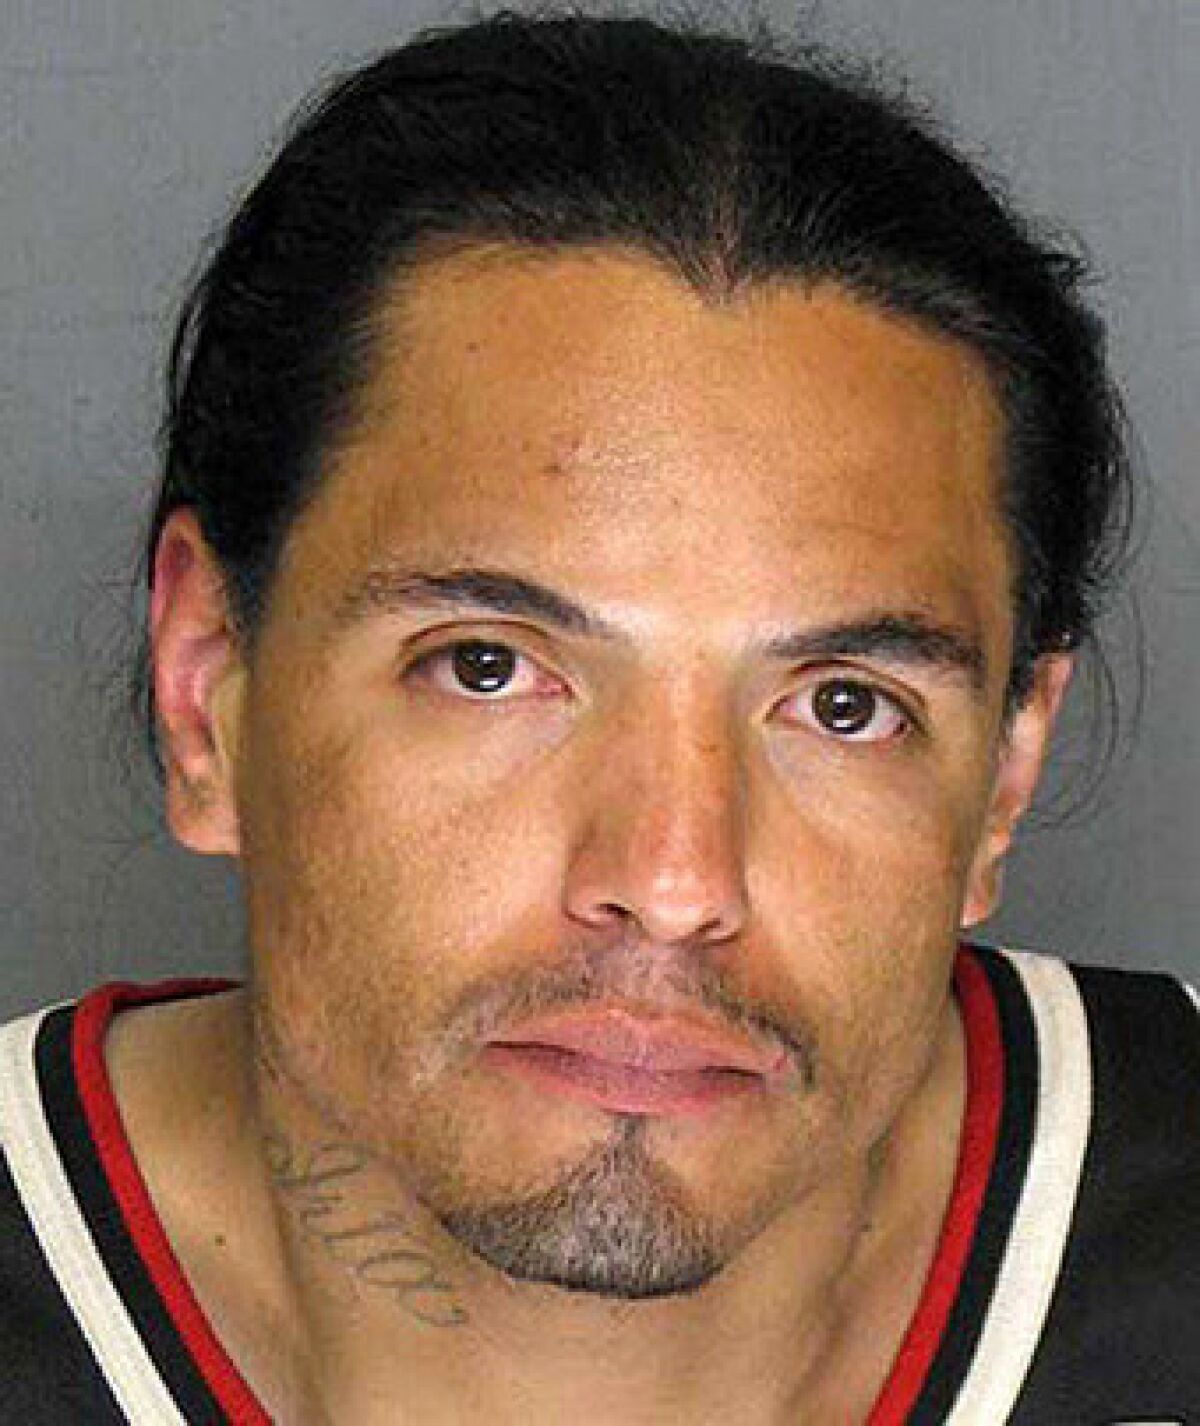 Raoul Leyva, a sex offender with a history of beating women, was convicted of attempted voluntary manslaughter after allowing the battery on his GPS device to go dead.